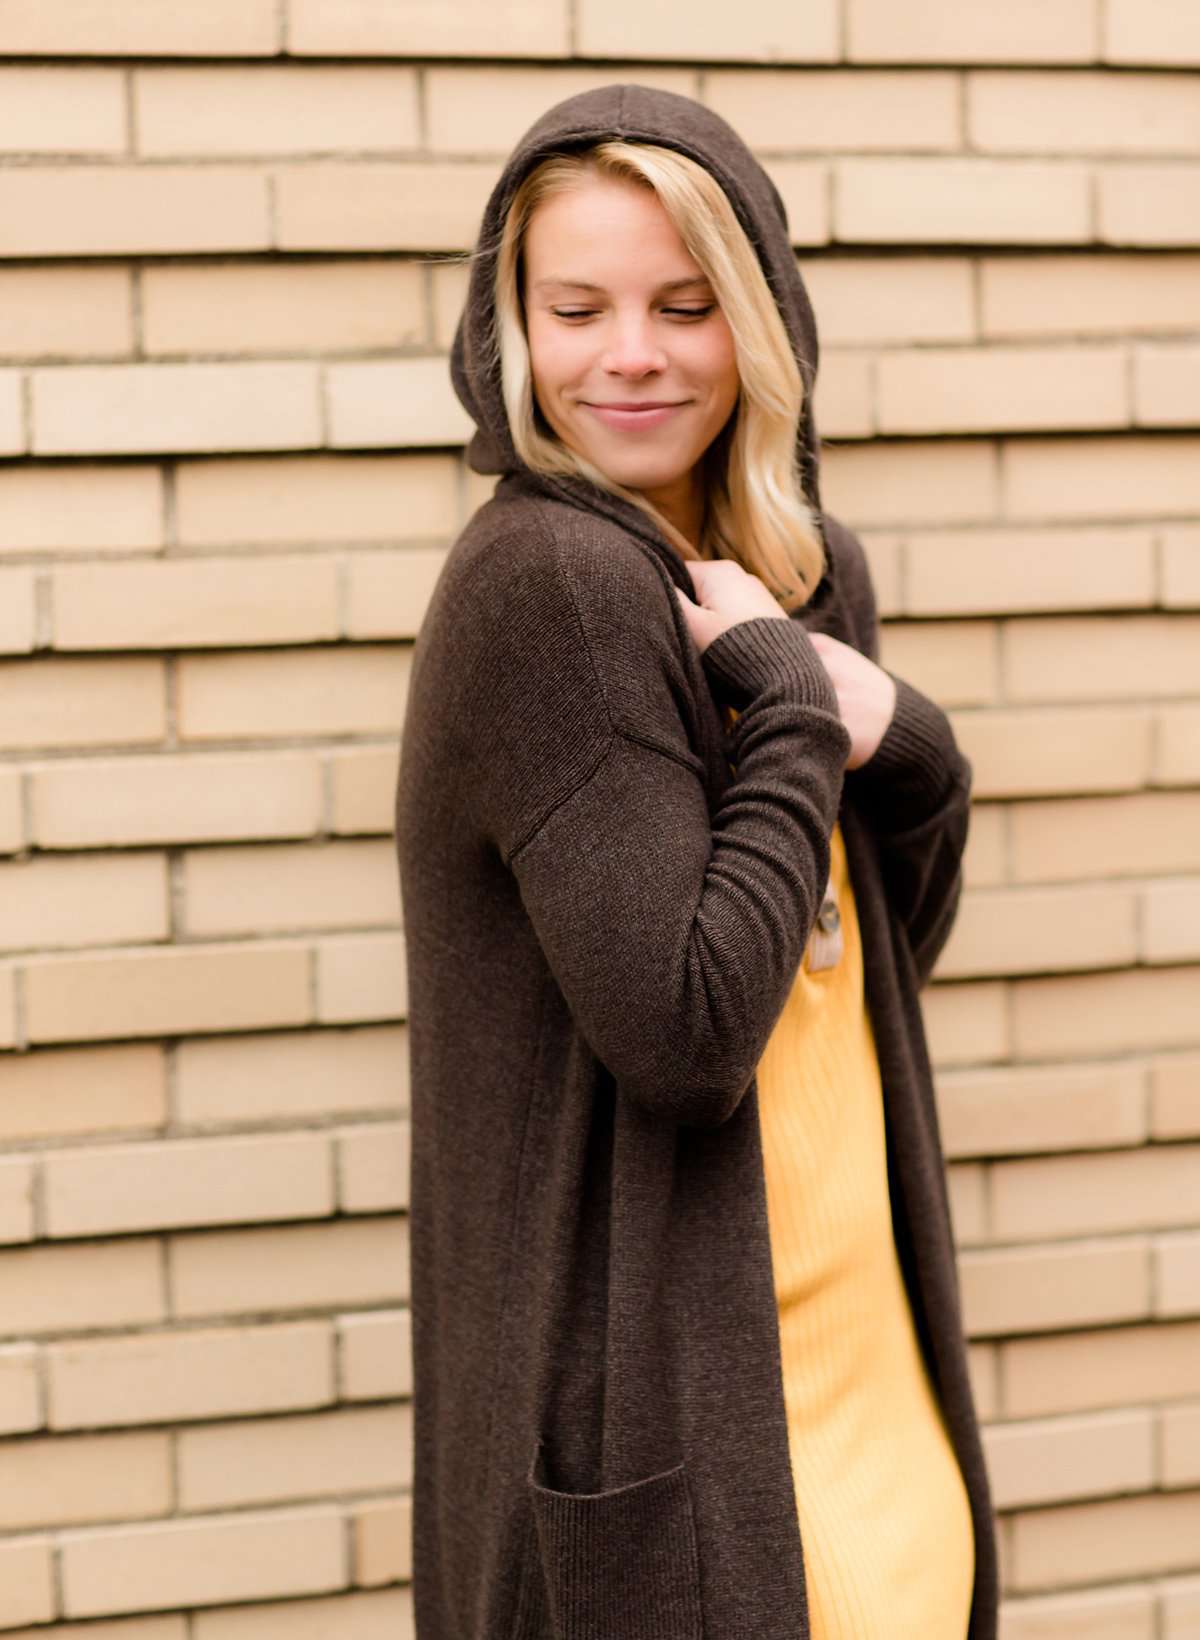 Modest Women's Hooded Long Cream and Charcoal Cardigans